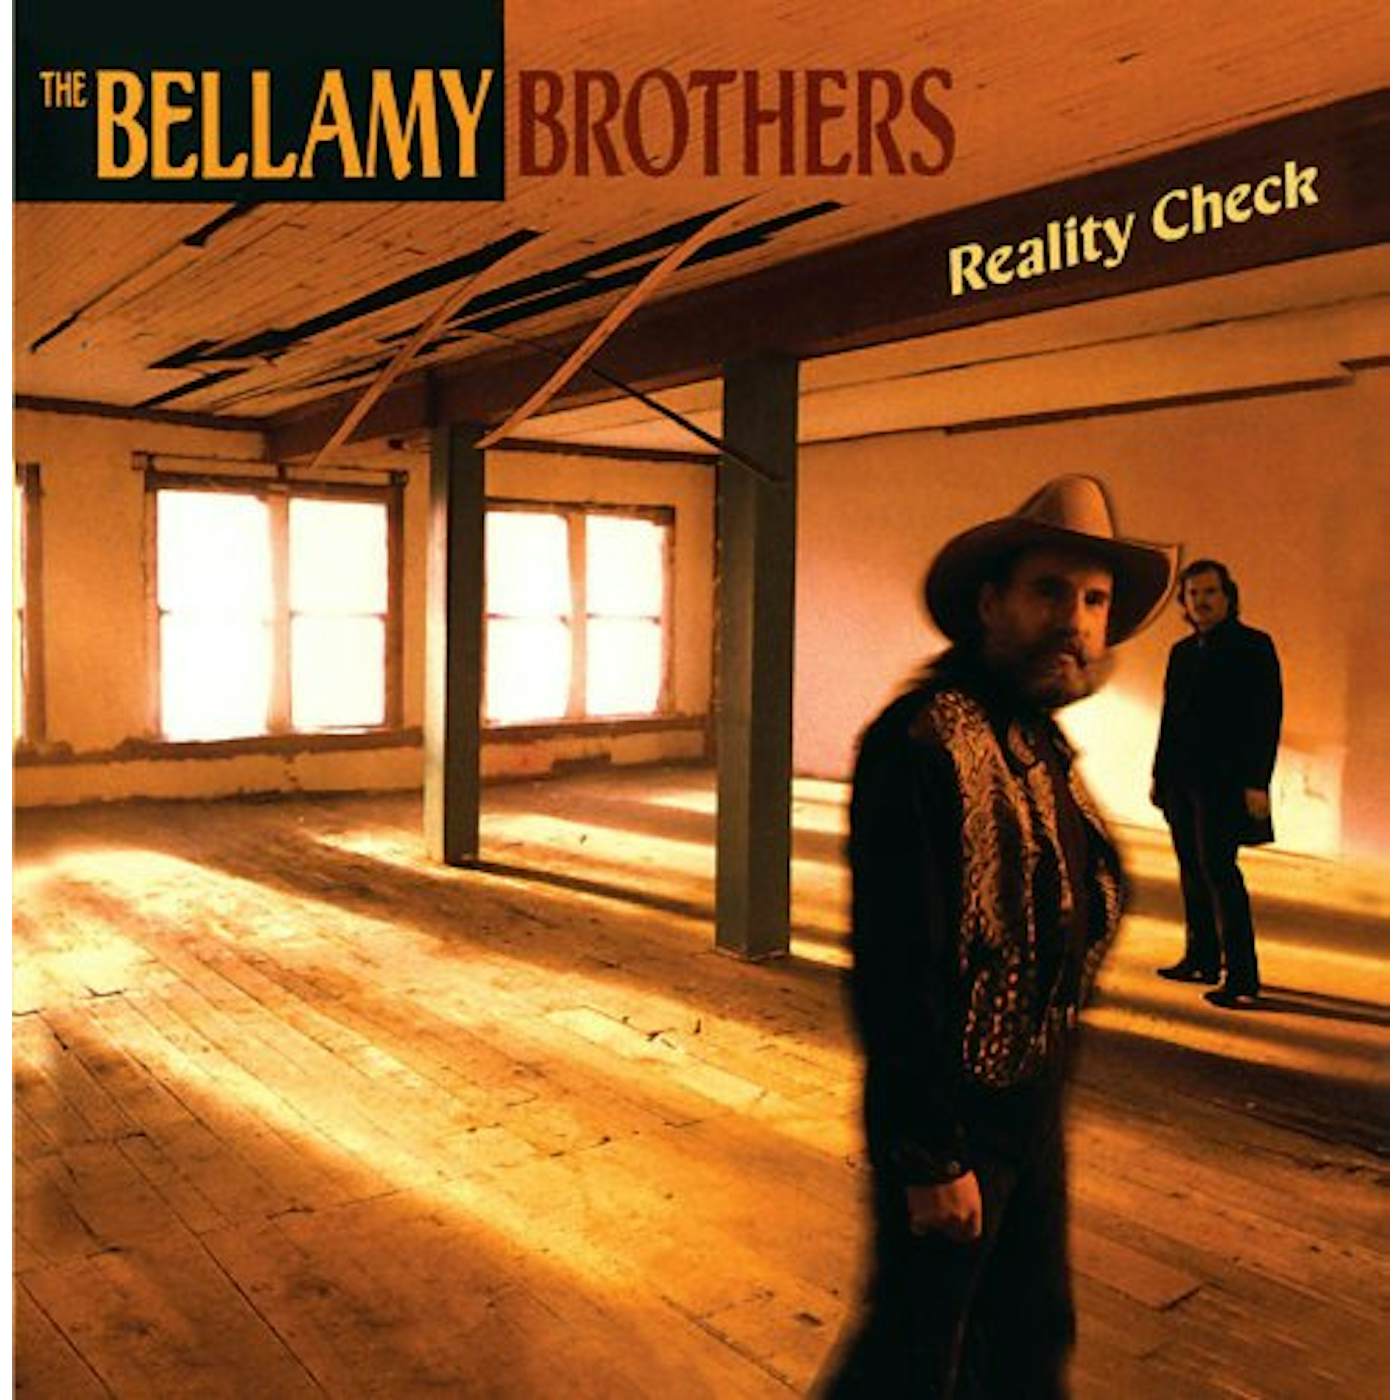 The Bellamy Brothers REALITY CHECK CD